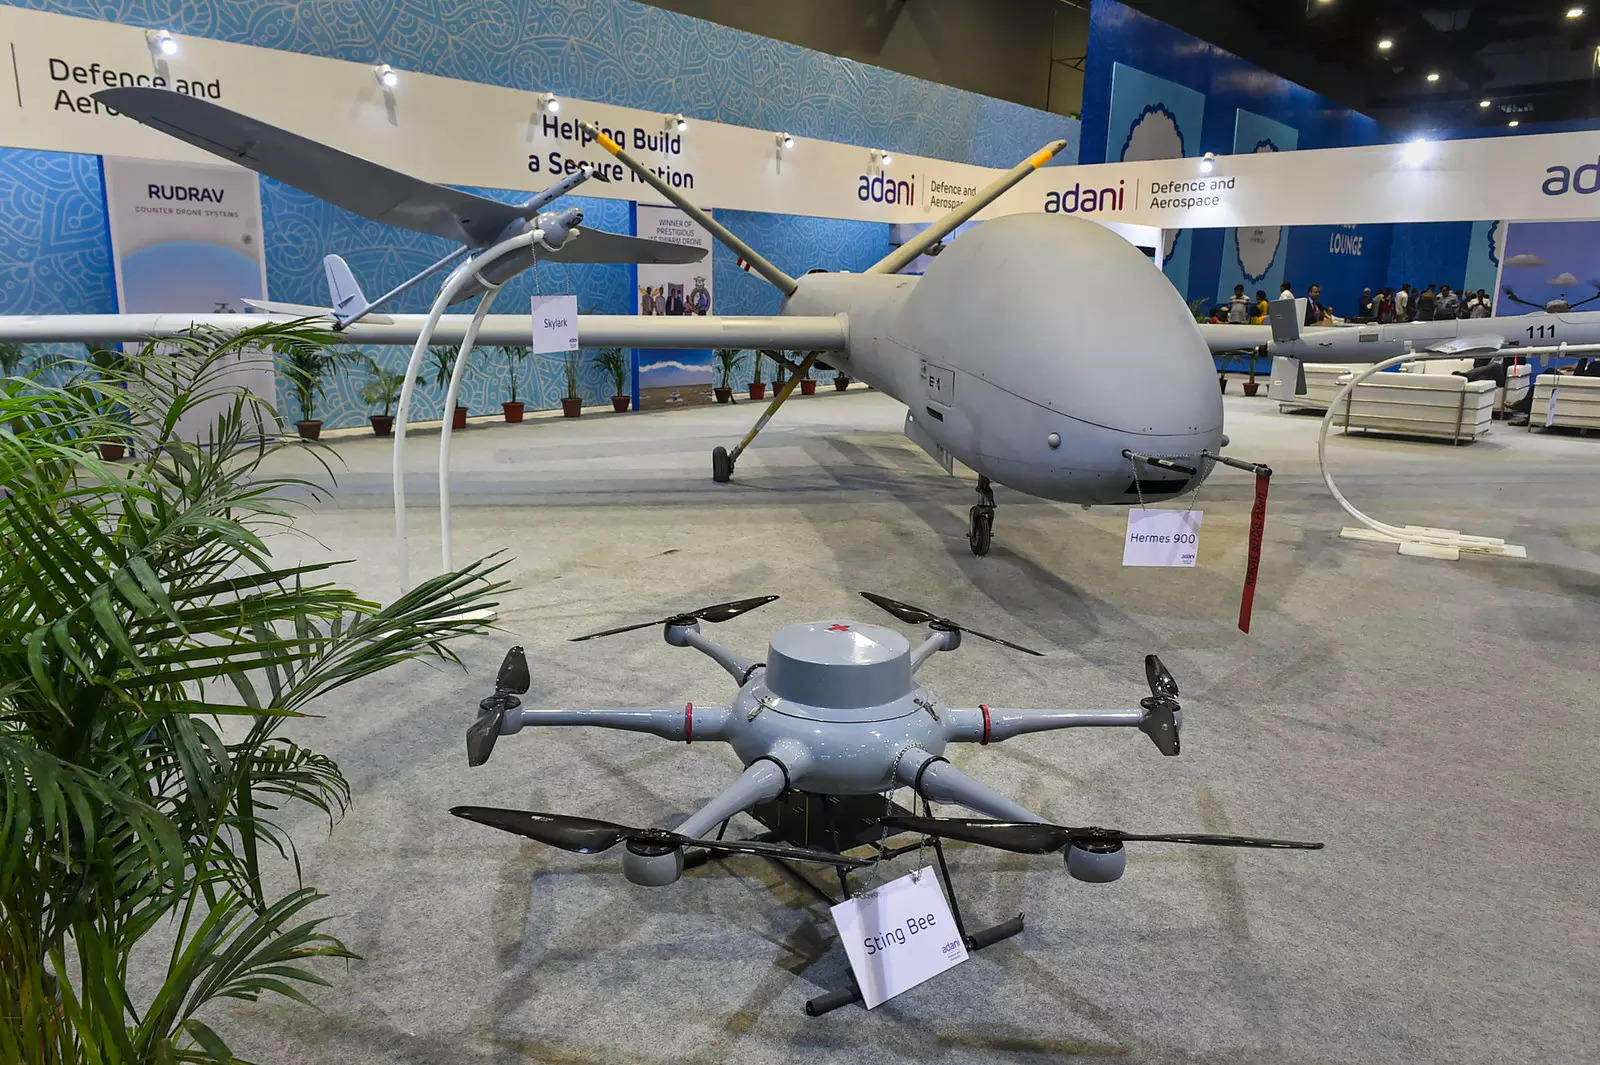 India's indigenous drones set to take flight but concerns remain